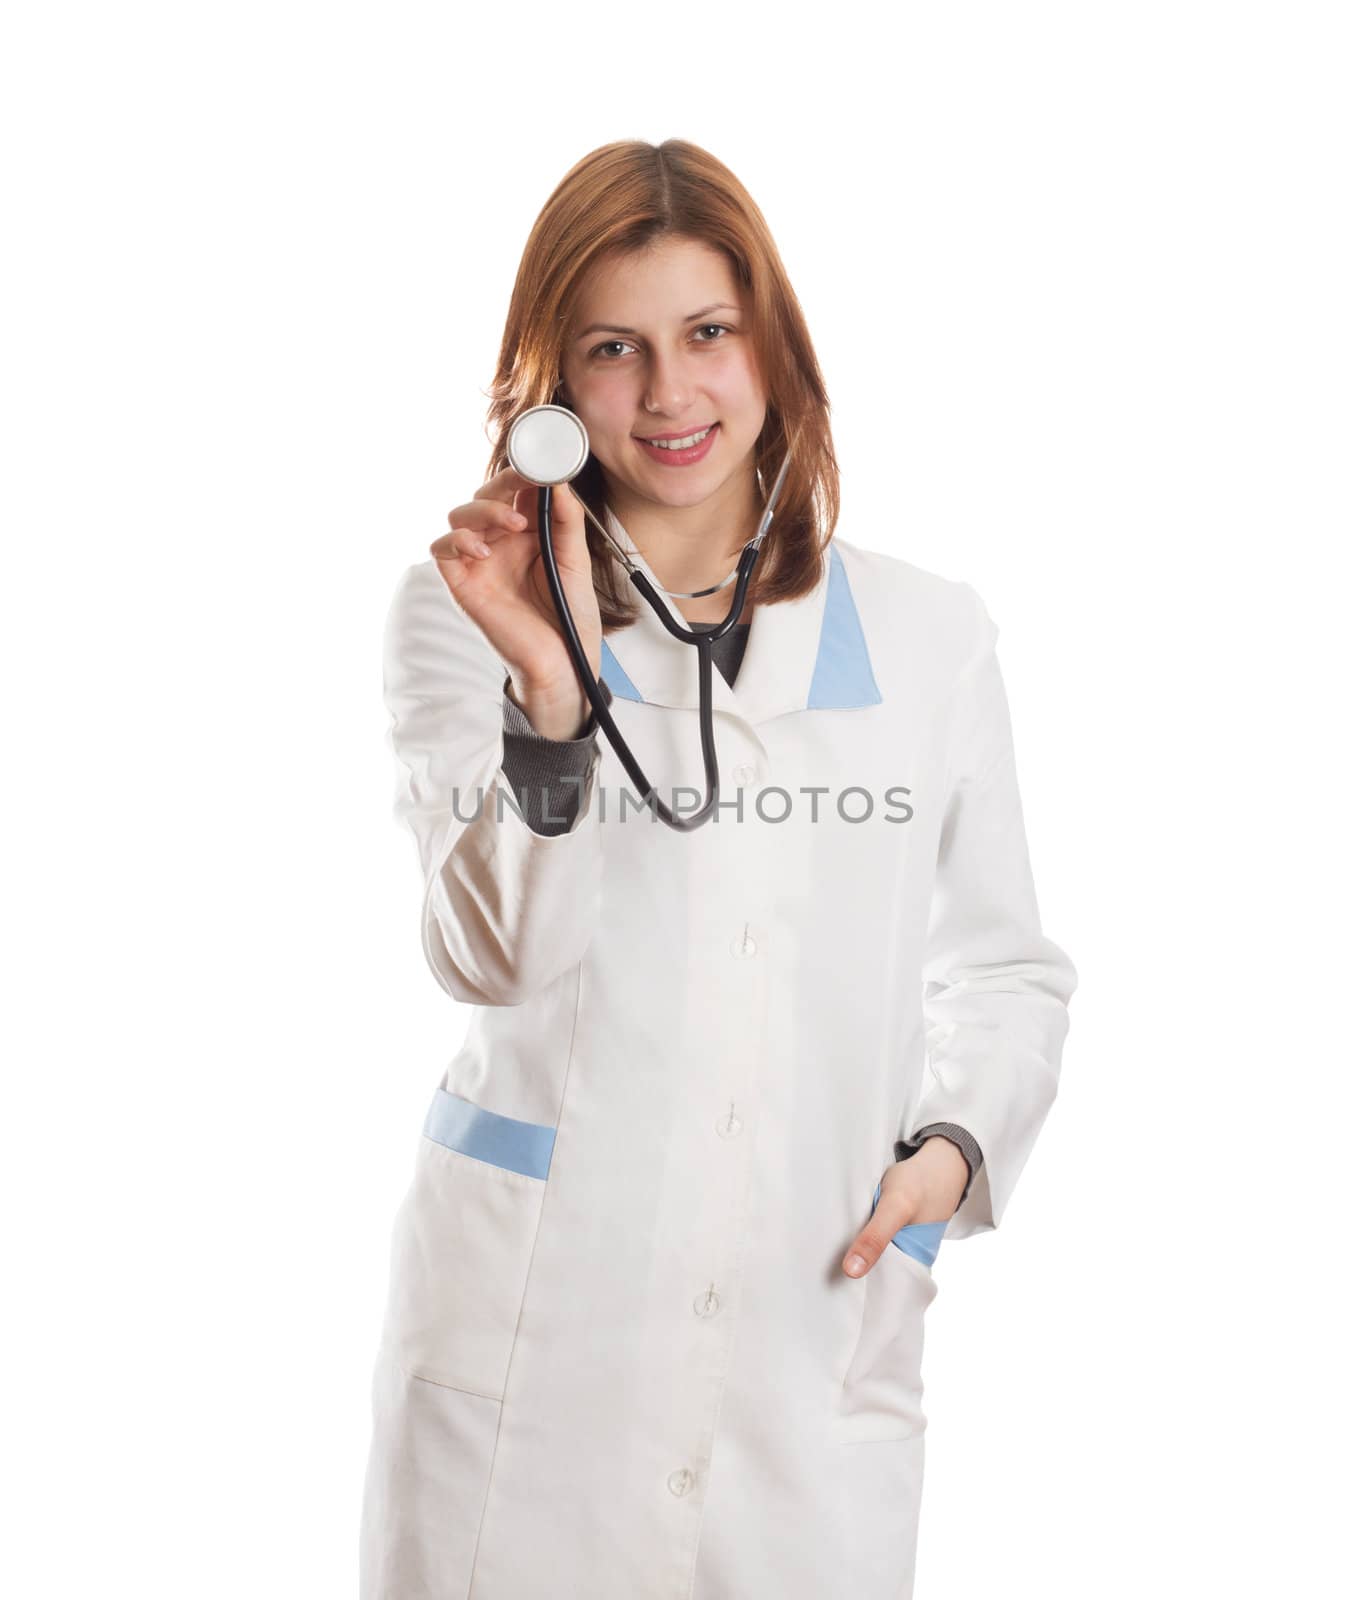 woman doctor with stethoscope isolated on white background